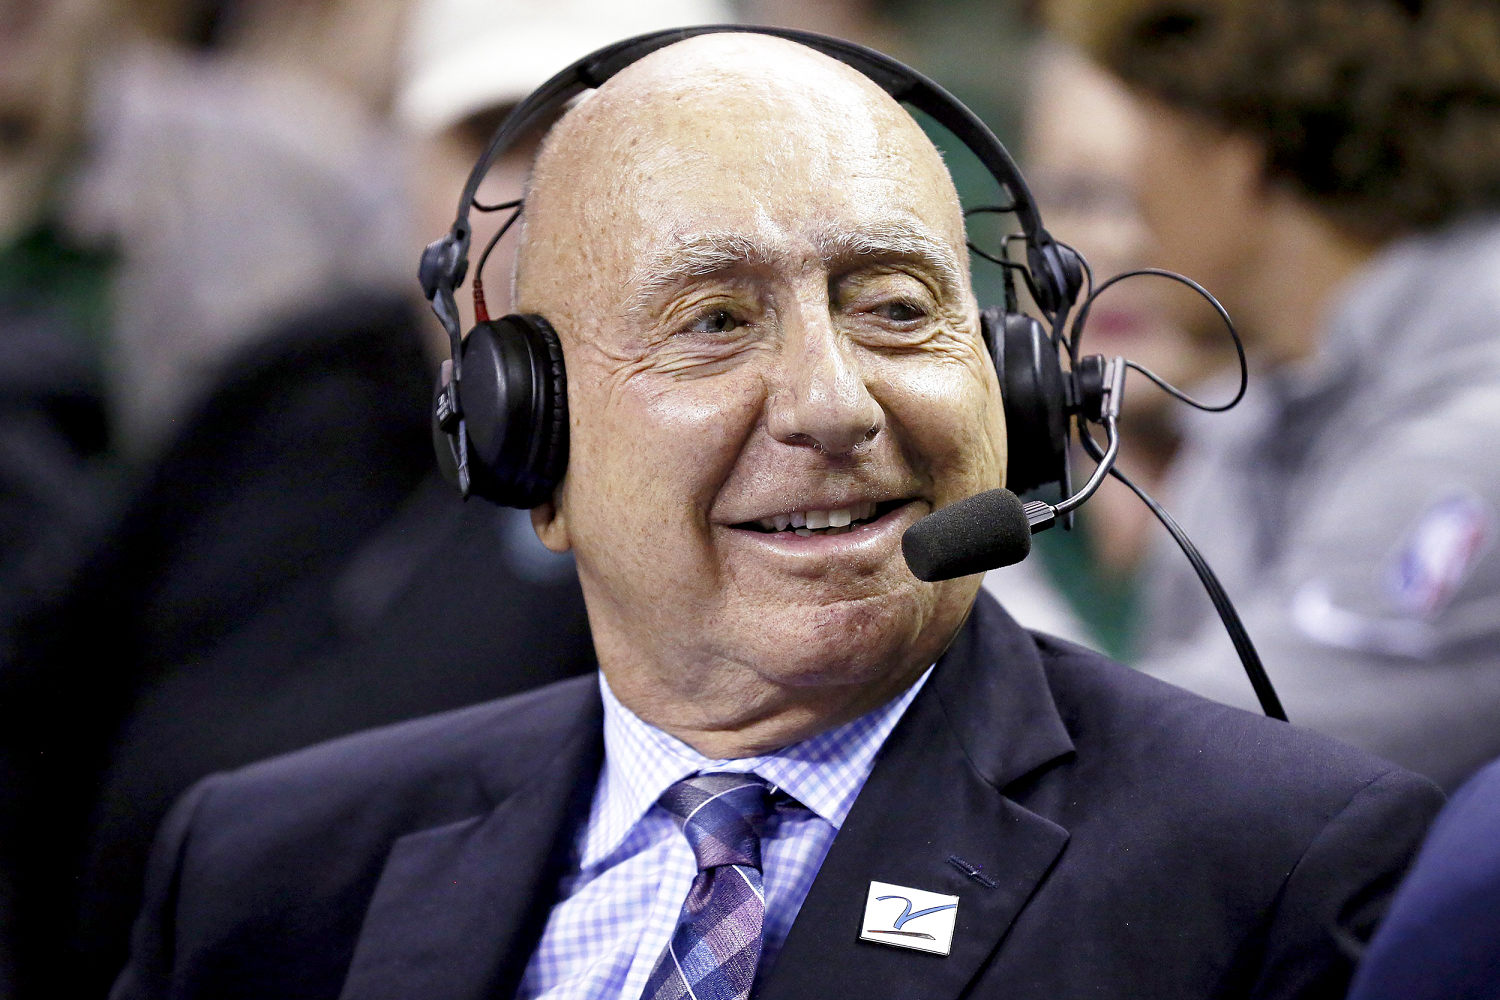 College basketball broadcaster Dick Vitale announces another cancer diagnosis